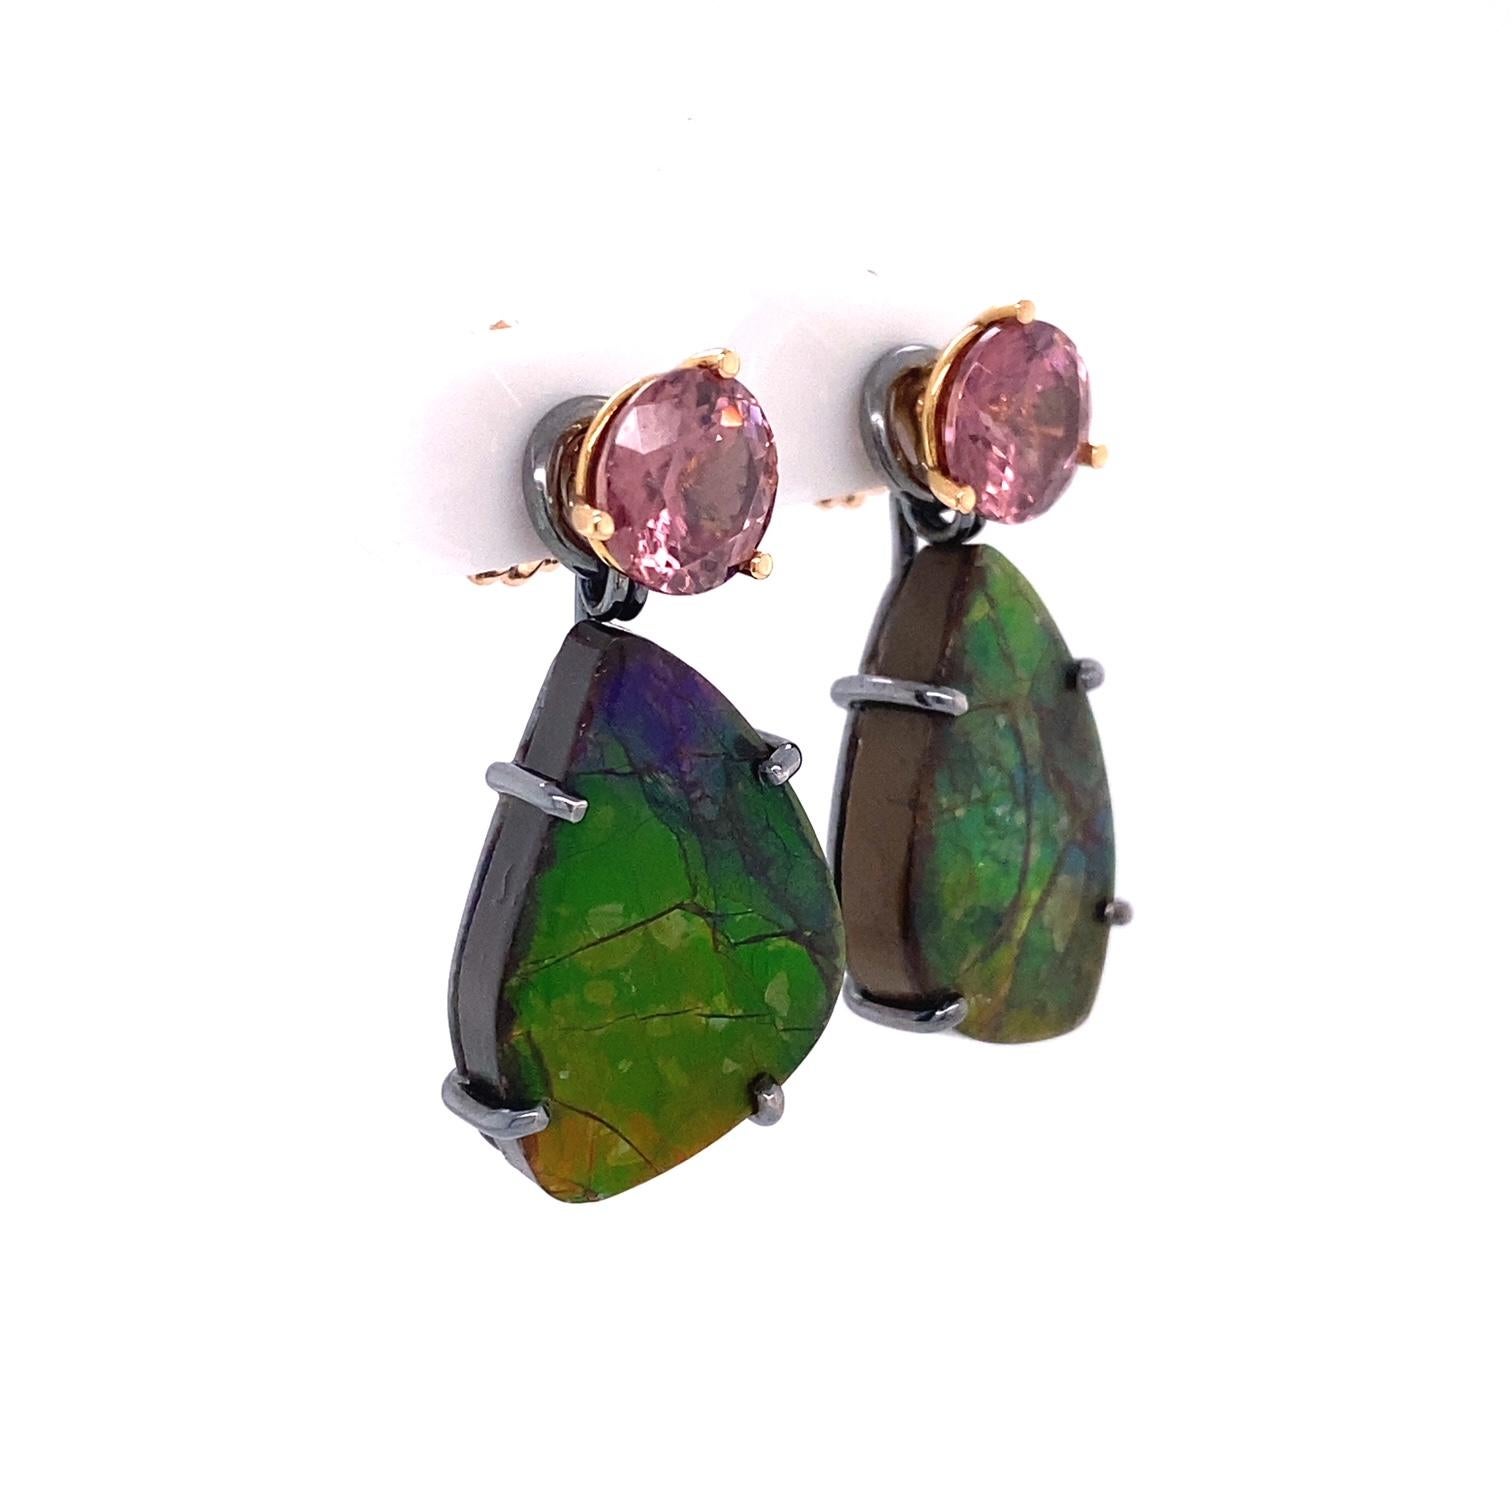 A pair of 18k rose gold martini head studs with 7.5mm rose zircons,4.74 total carat weight, with a pair of ammolite earring jackets set in oxidized sterling silver. Designed and made by llyn strong.

Items sold separately upon request.